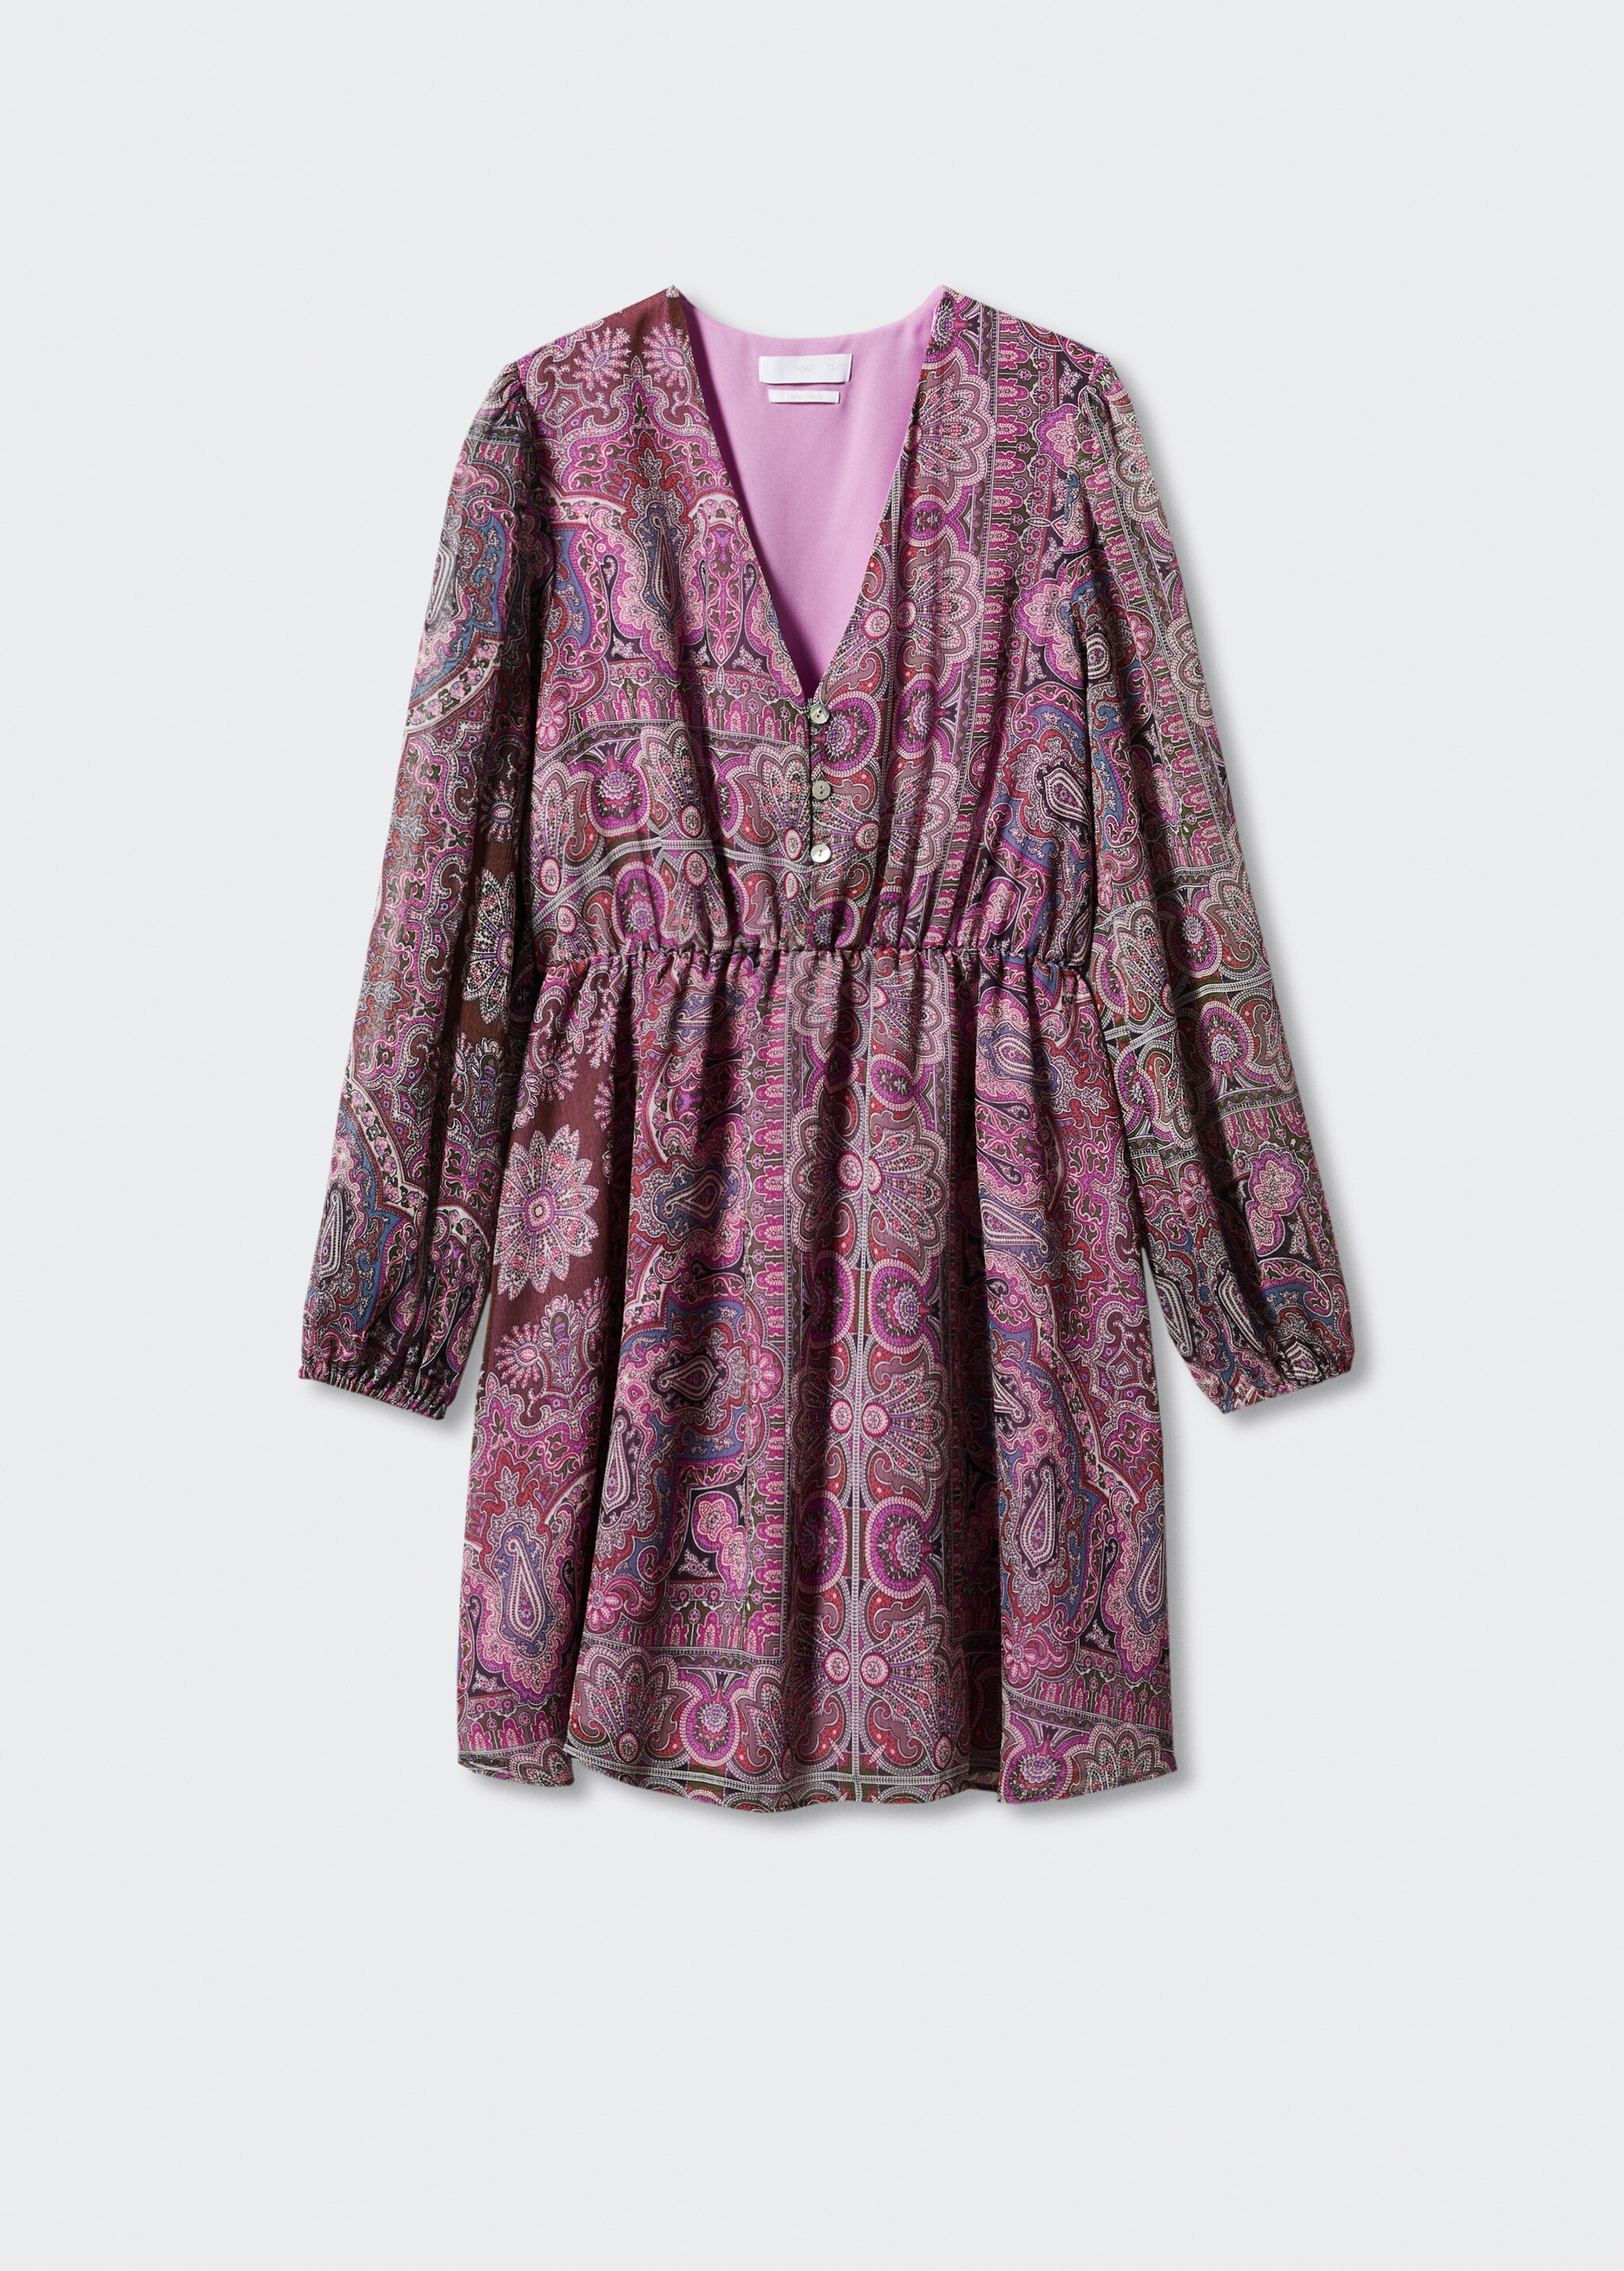 Paisley print dress with buttons - Article without model